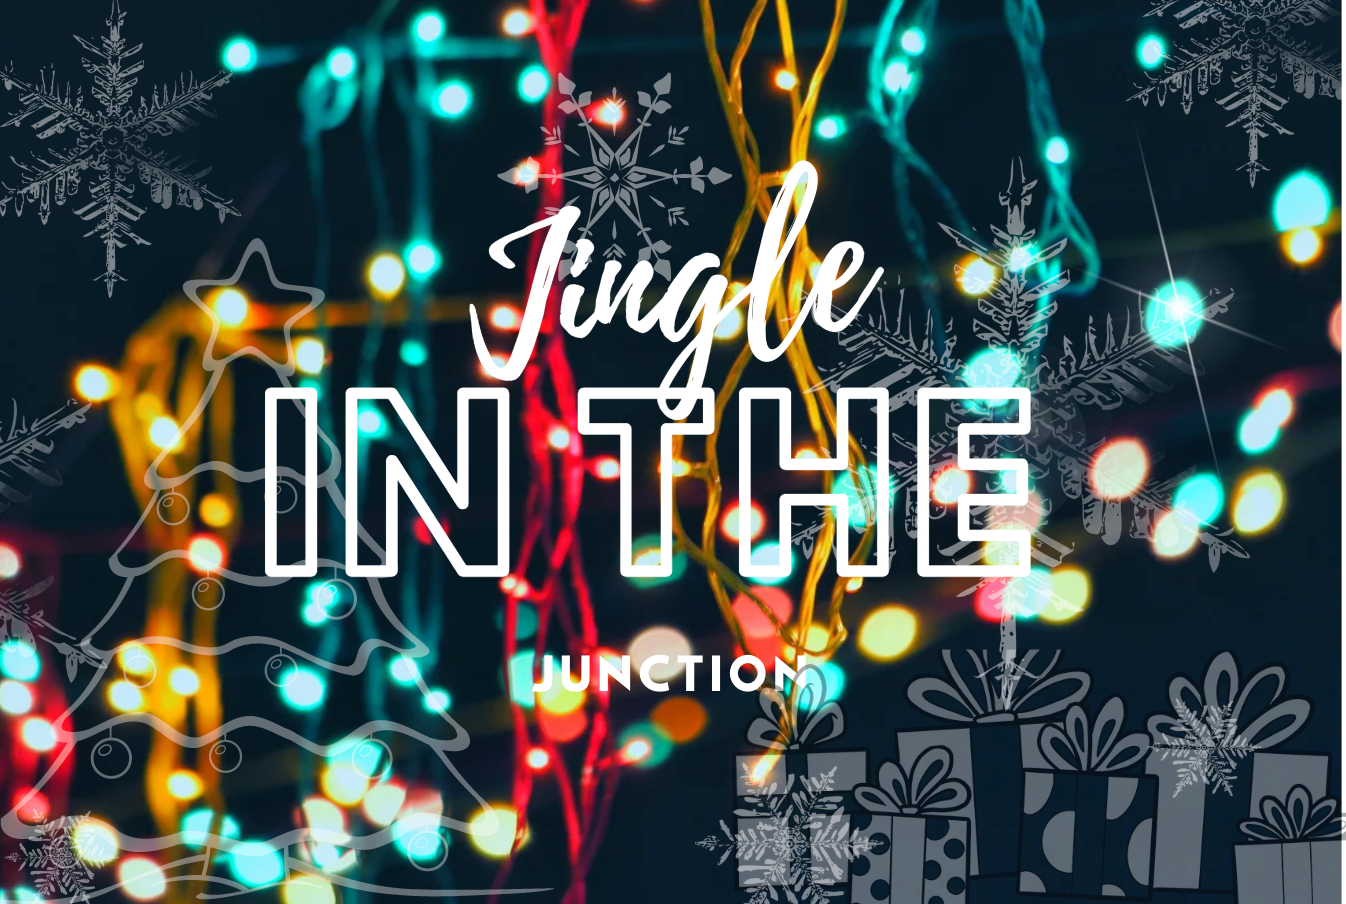 Local Traditions Jingle In The Junction Tenth Street Times